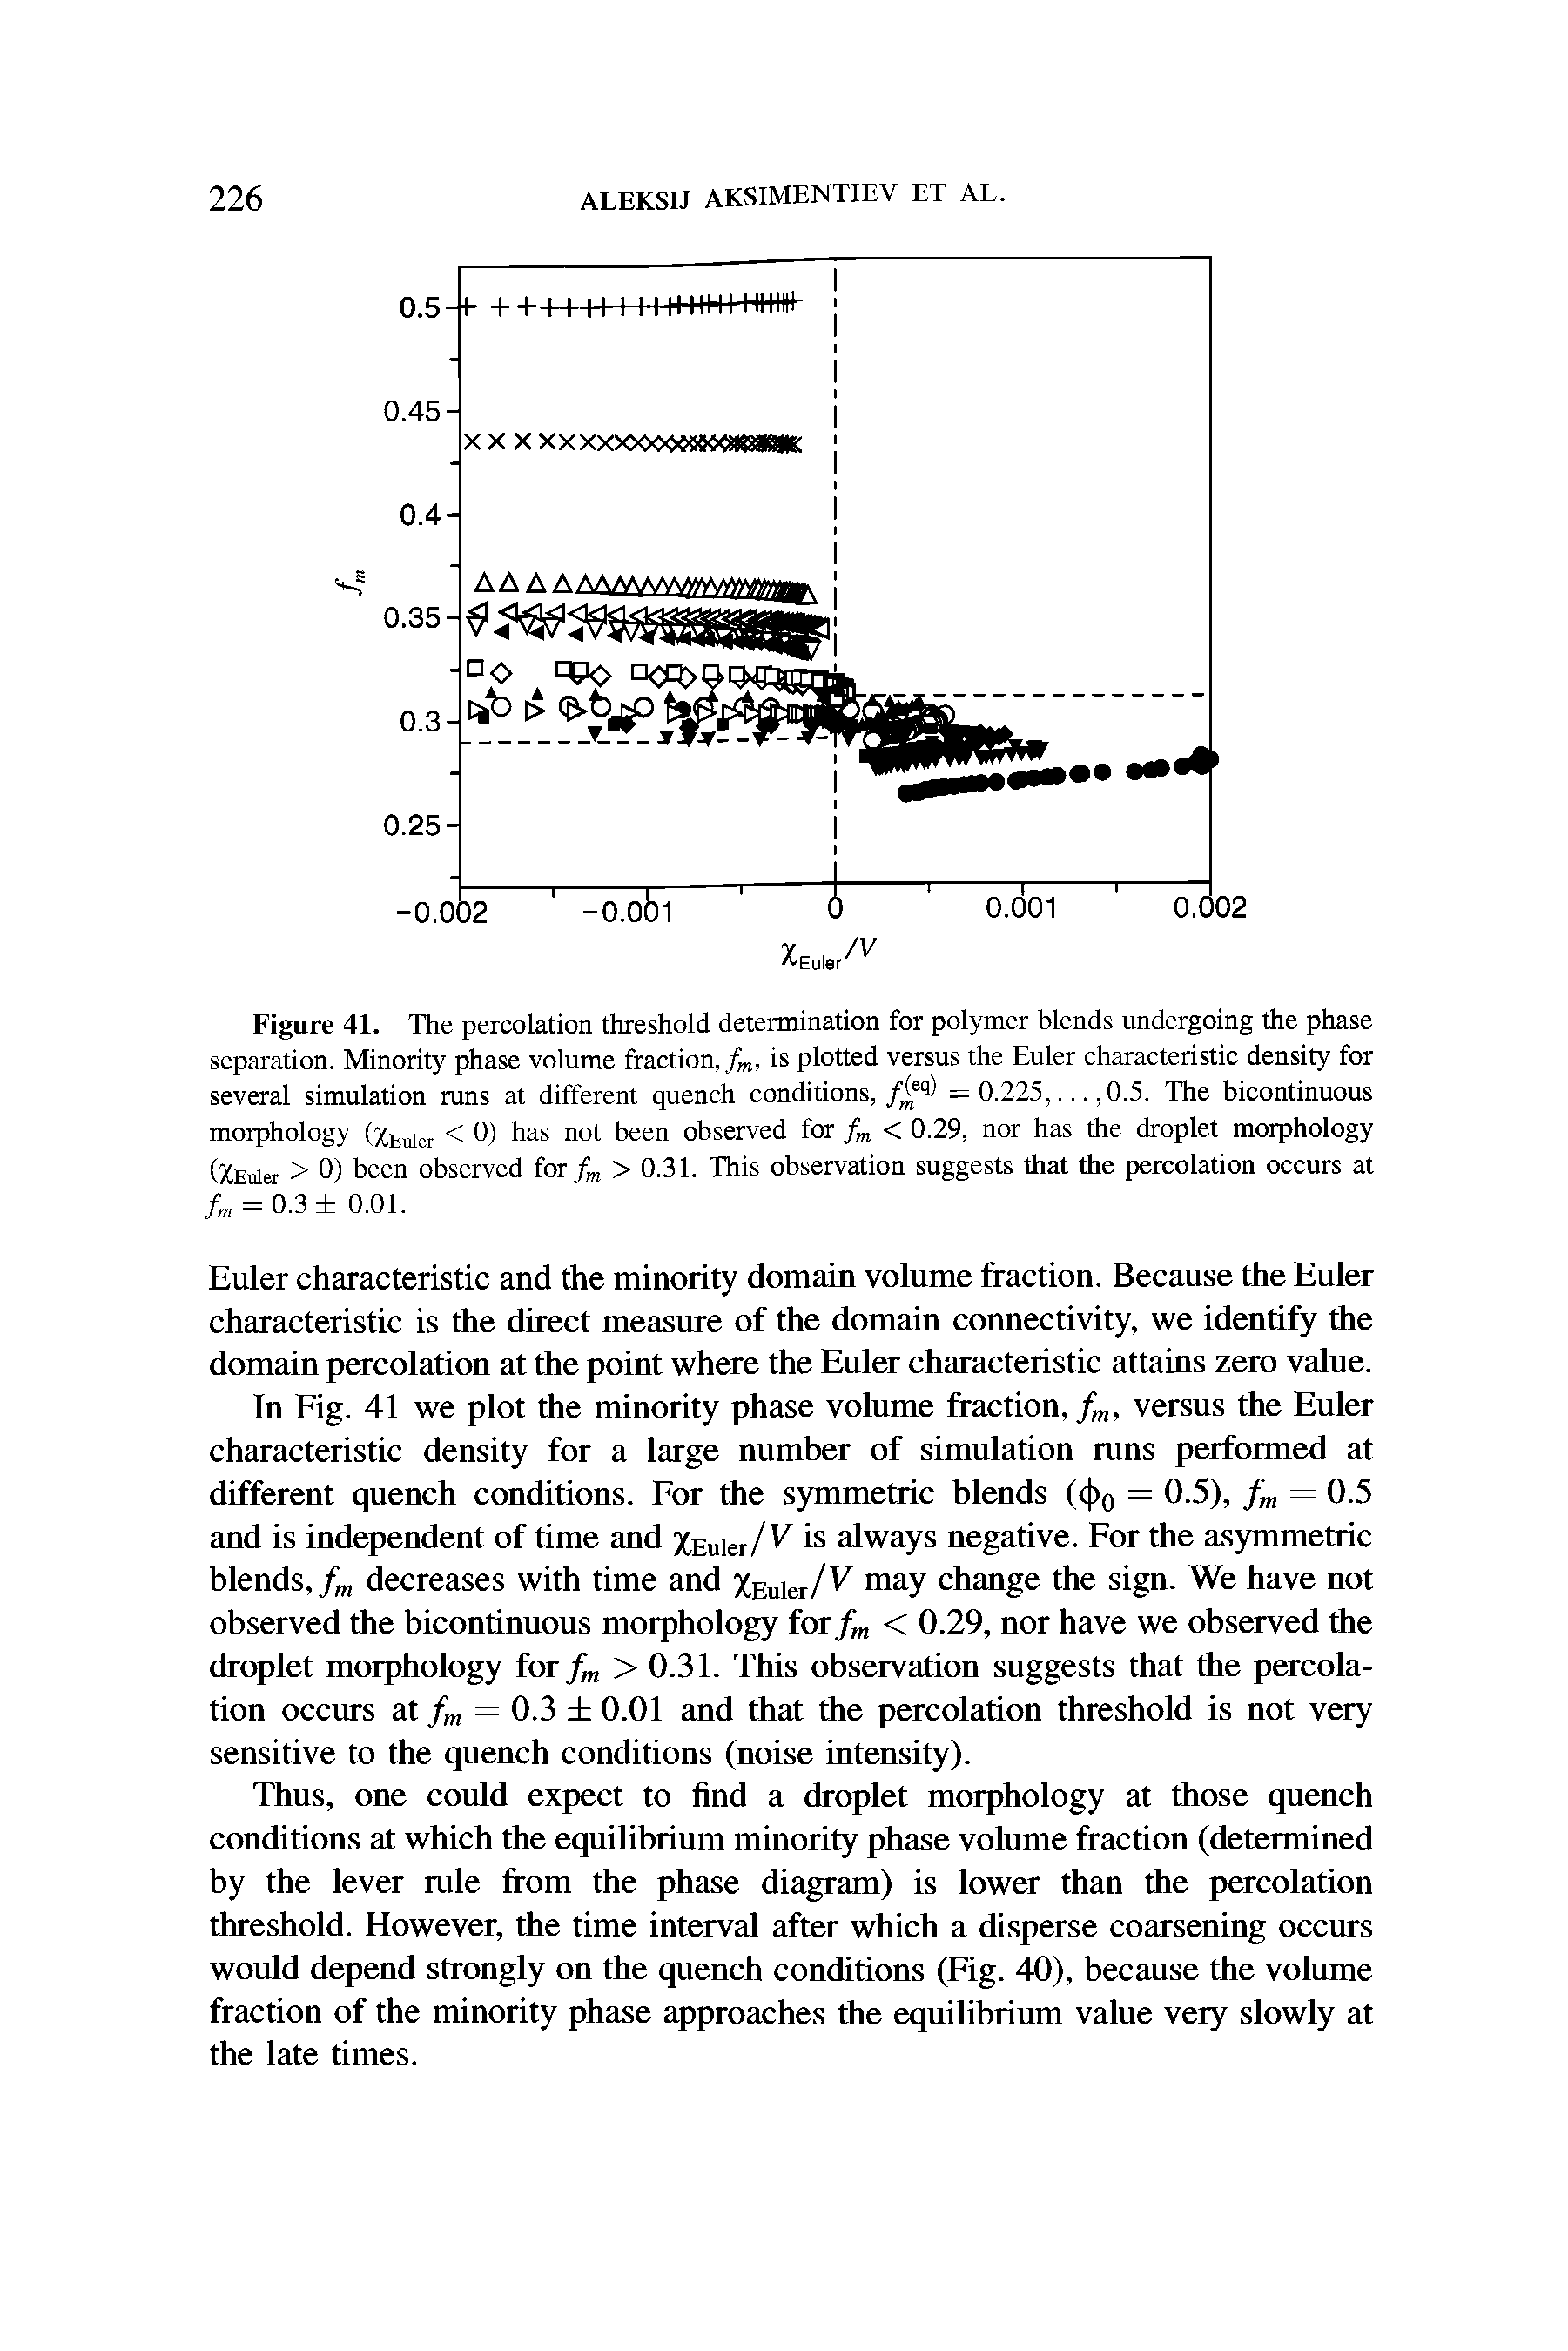 Figure 41. The percolation threshold determination for polymer blends undergoing the phase separation. Minority phase volume fraction, fm, is plotted versus the Euler characteristic density for several simulation runs at different quench conditions, /meq- = 0.225,..., 0.5. The bicontinuous morphology (%Euier < 0) has not been observed for fm < 0.29, nor has the droplet morphology (/(Euler > 0) been observed for/m > 0.31. This observation suggests that the percolation occurs at fm = 0.3 0.01.